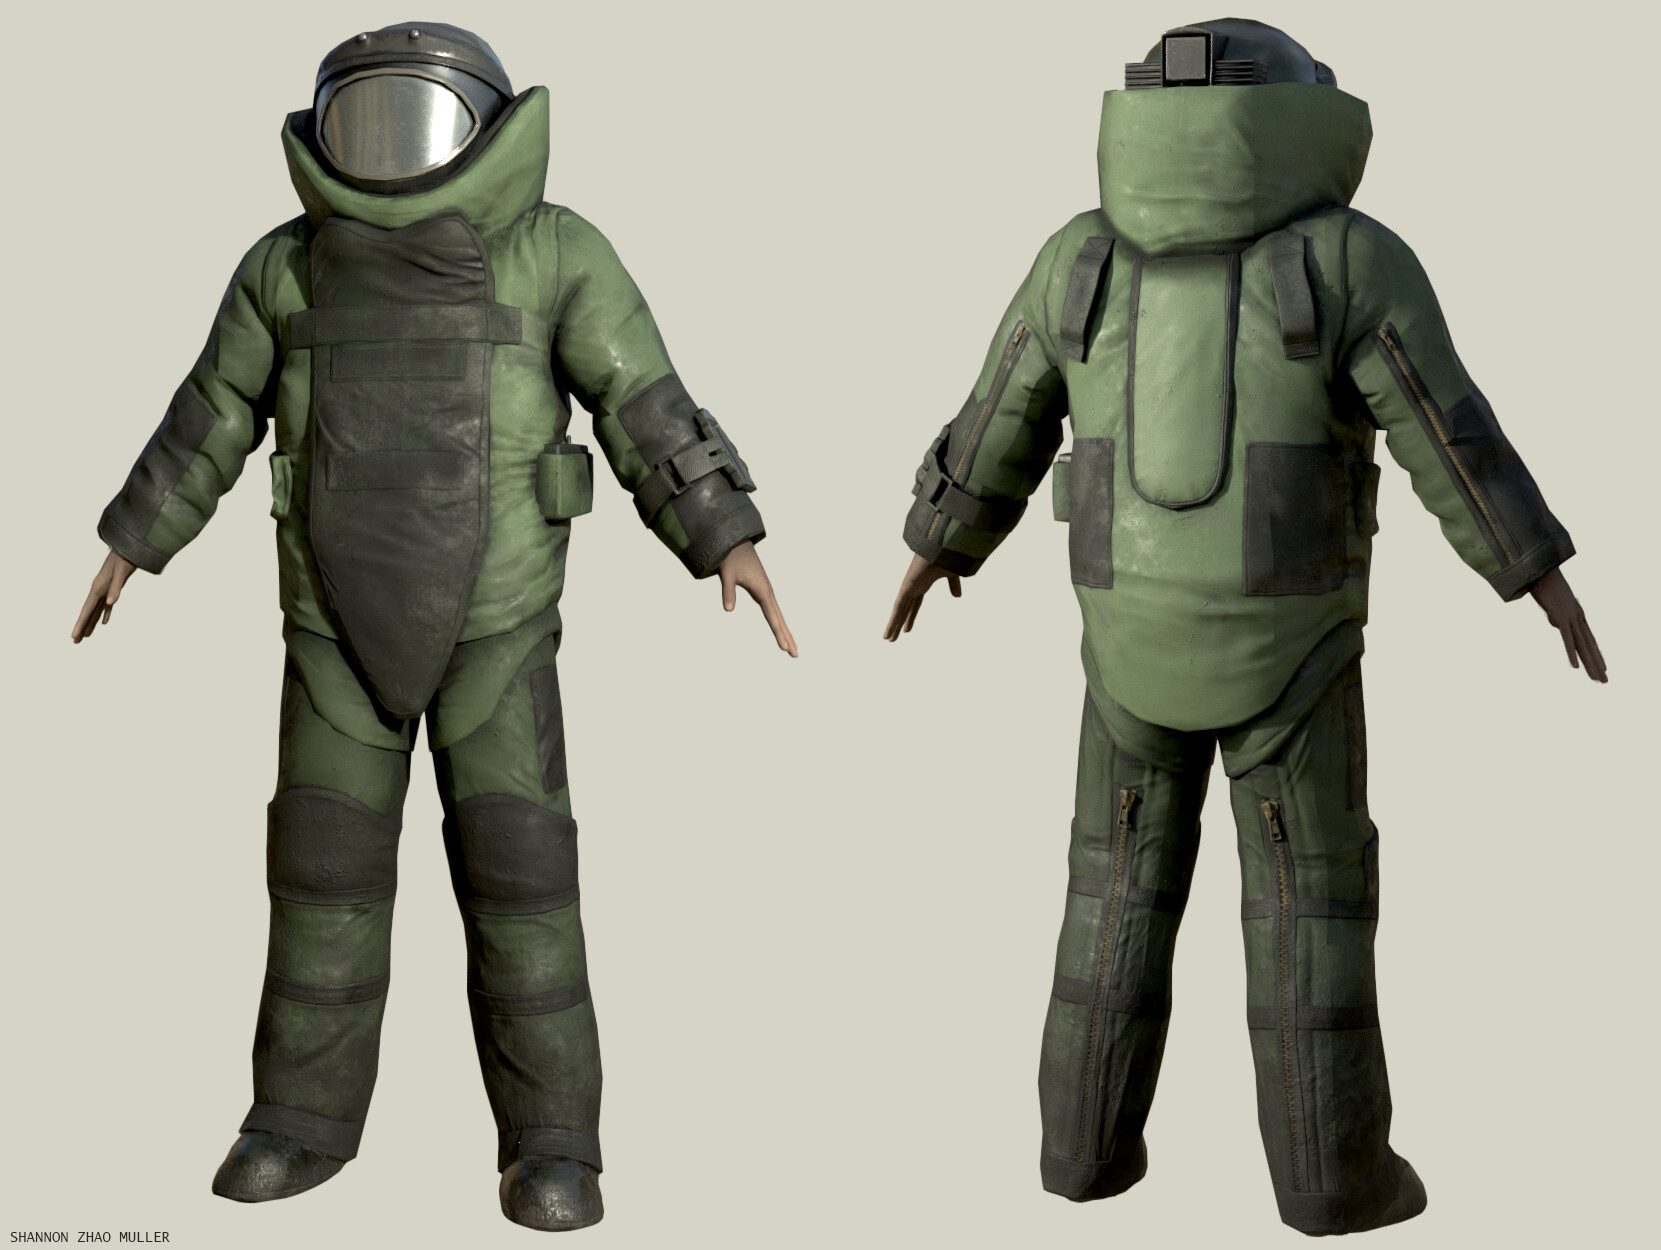 Next Generation Advanced Bomb Suit picked up by US Army